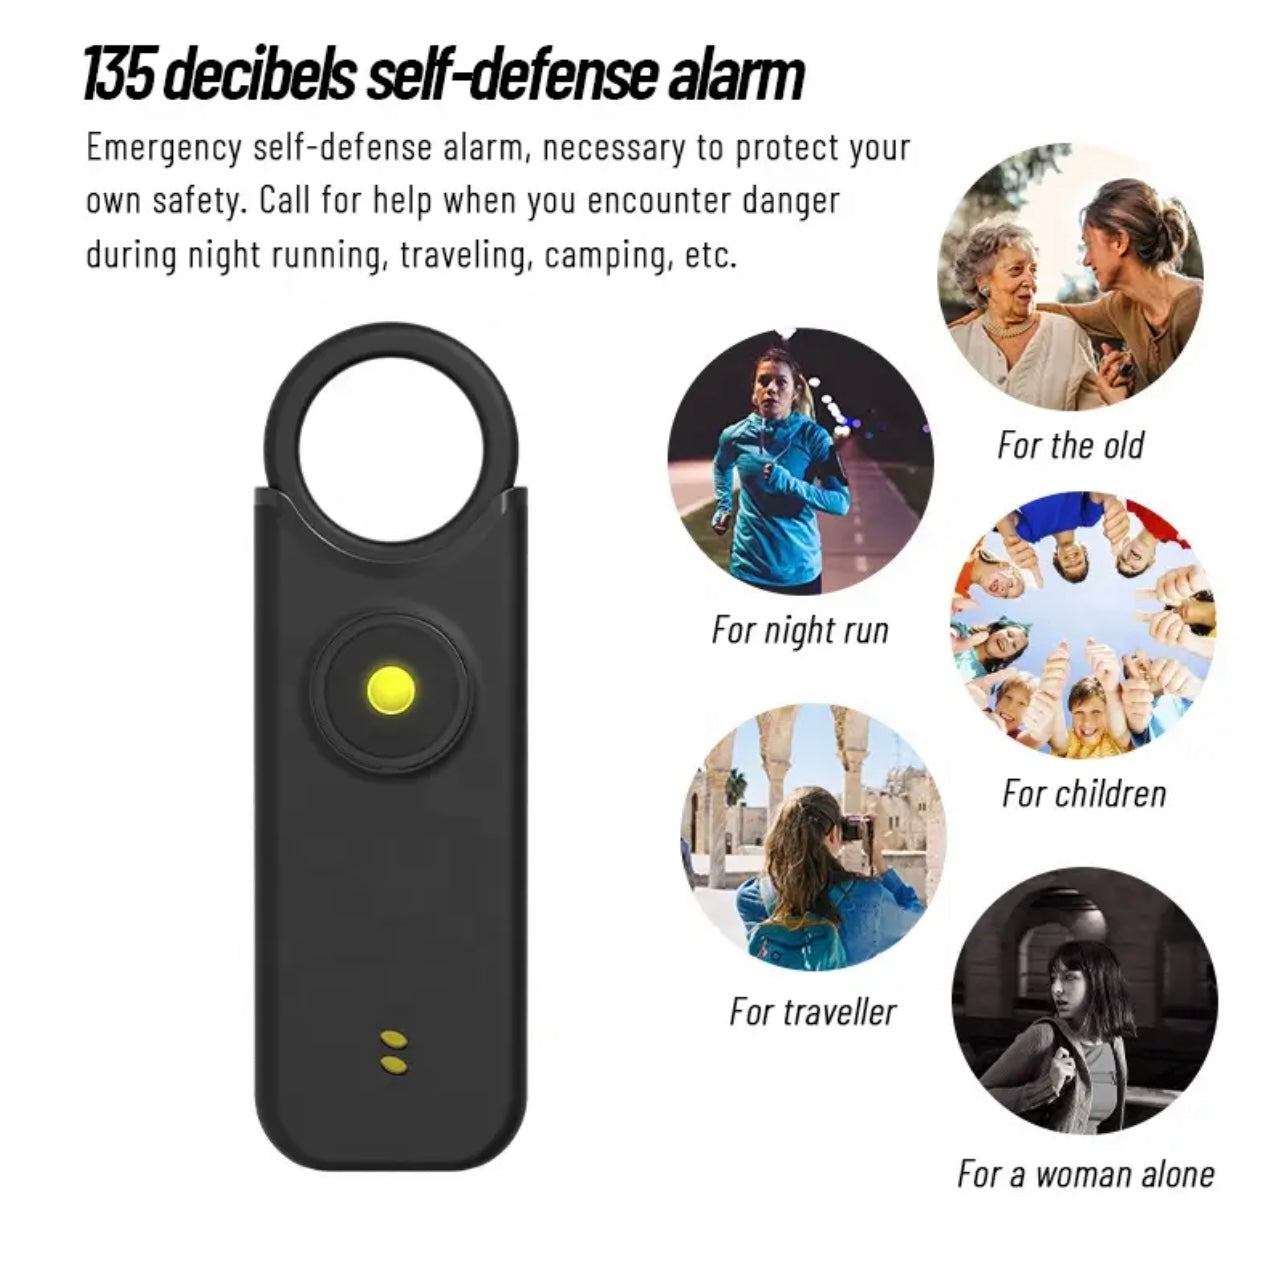 Oz Medical Personal Safety Alarm with LED Light.